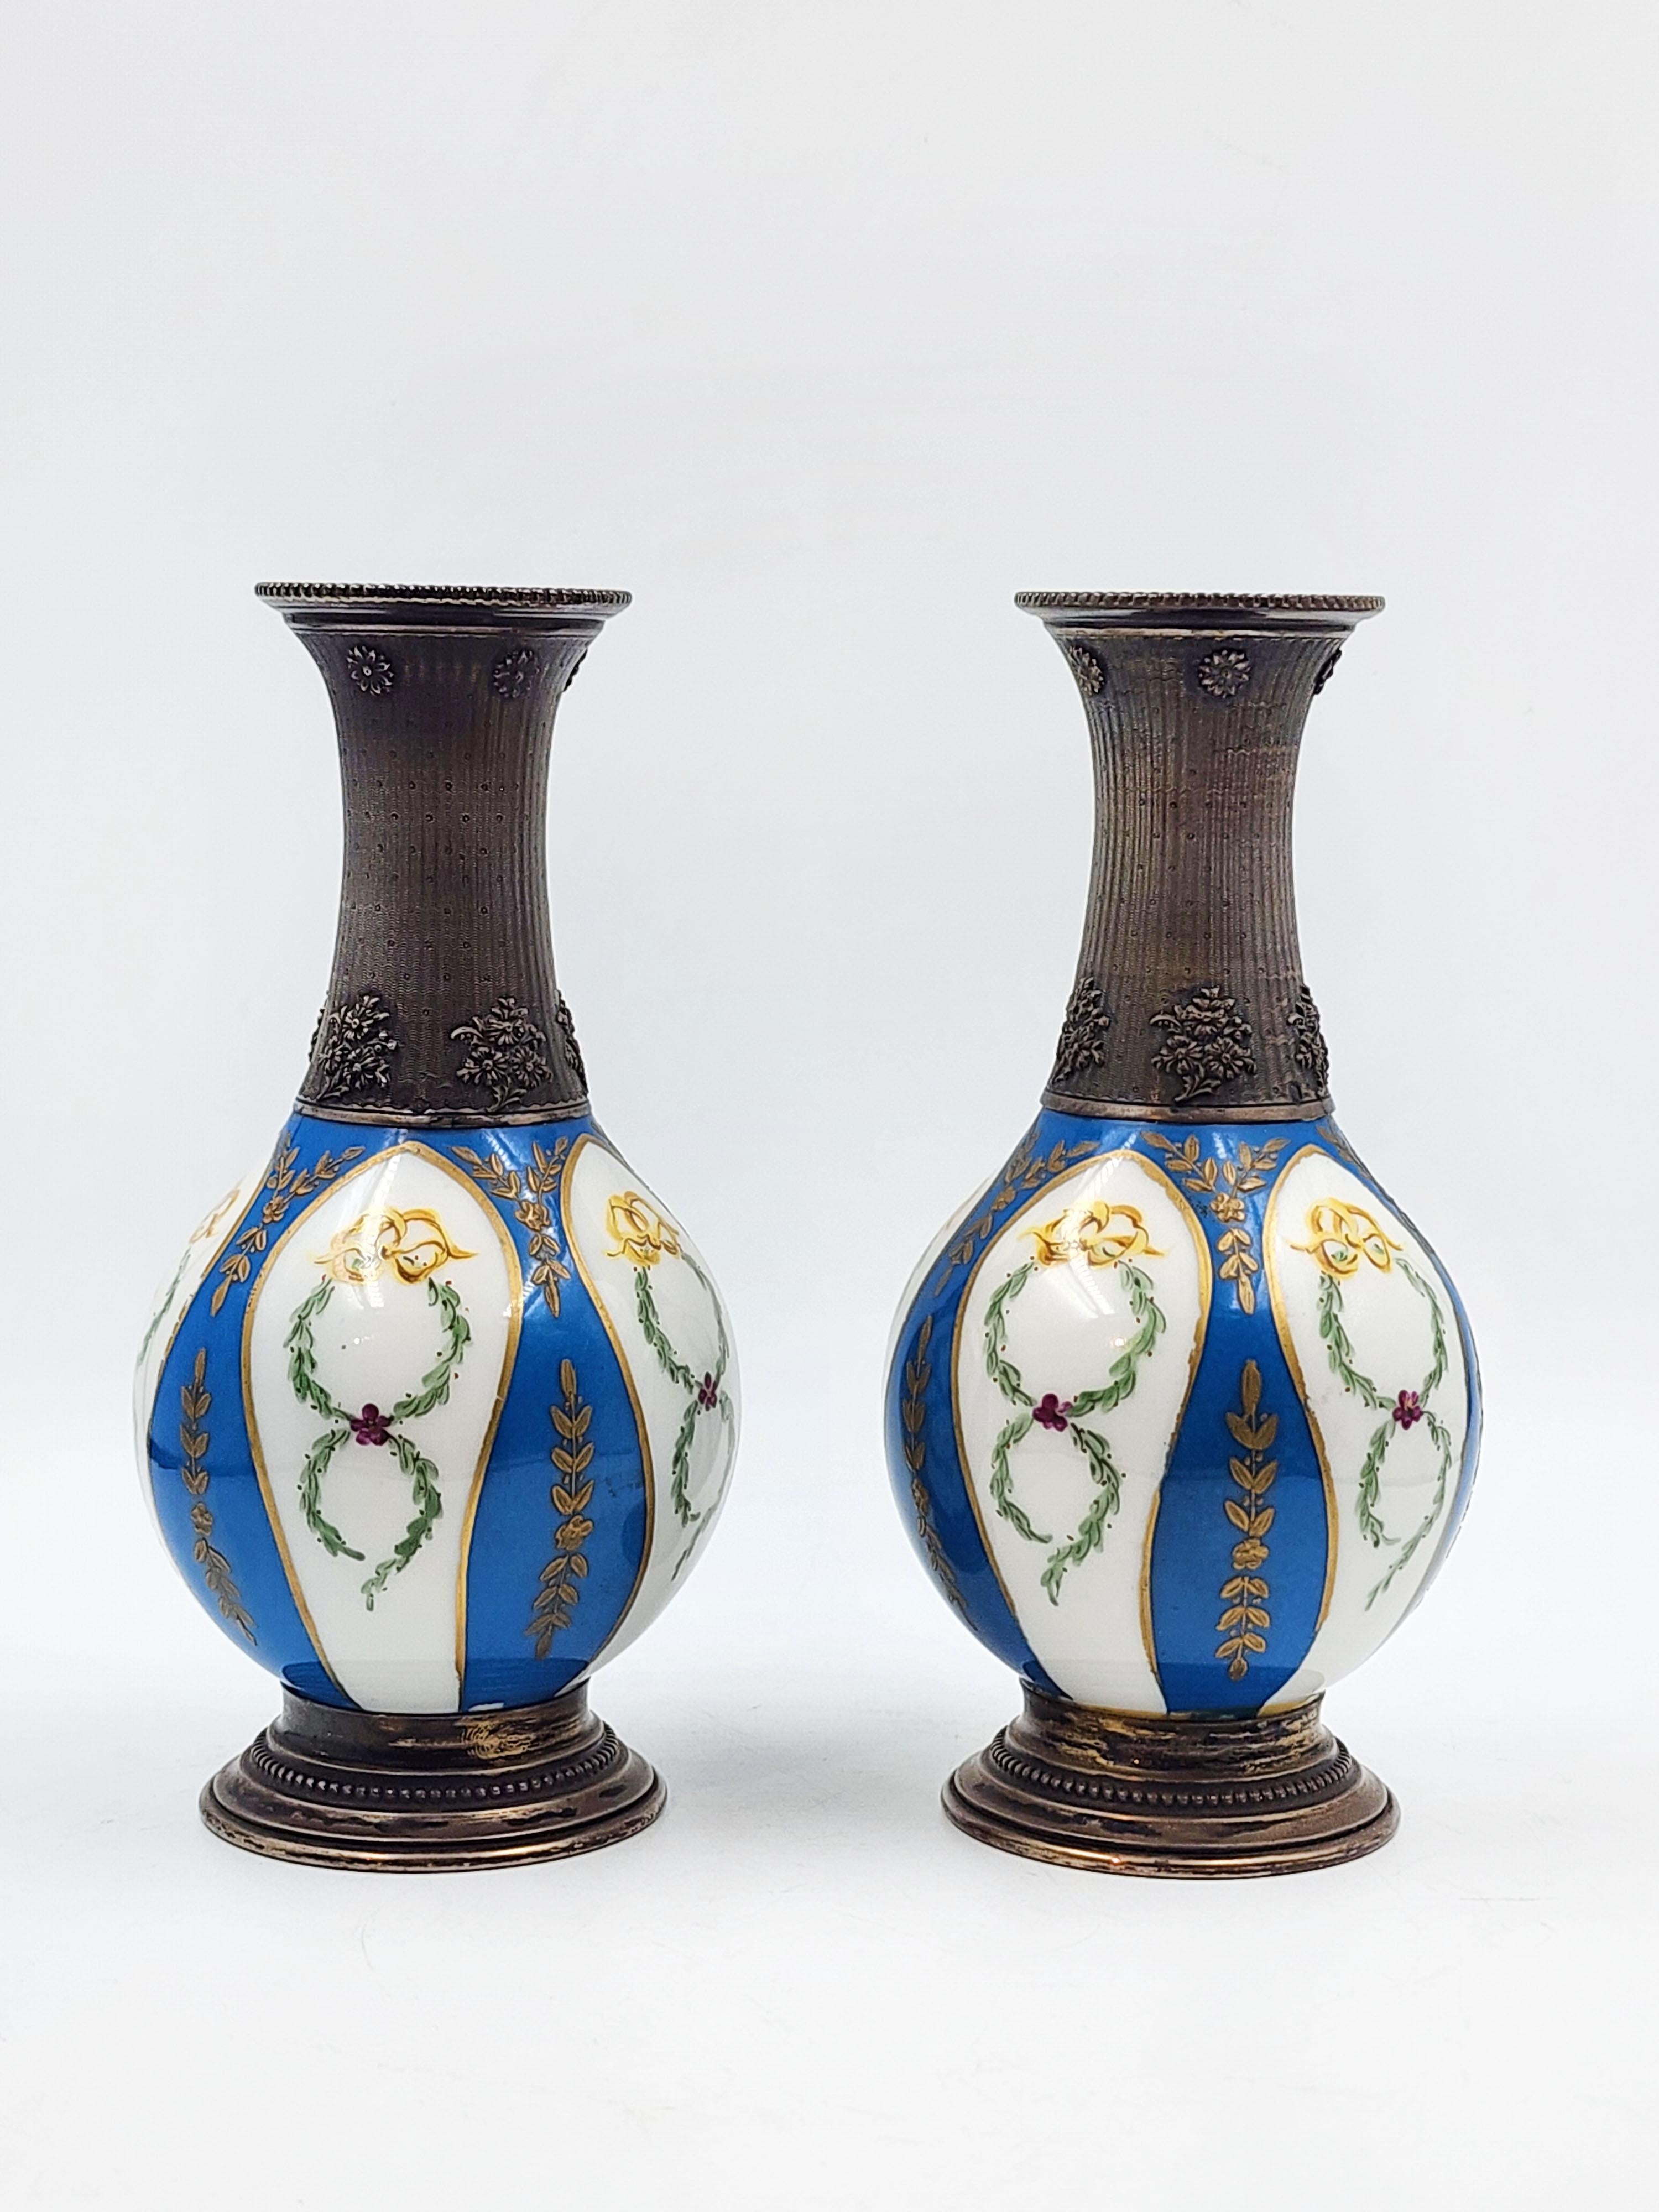 Pair of silver and porcelain sevres vases, 19th century
Beautiful pair of sevres porcelain vases in blue and white with gold floral details, with silver neck, mouth and base. Textured on the upper part.
Measures:
Height: 15 centimeters
Diameter: 7